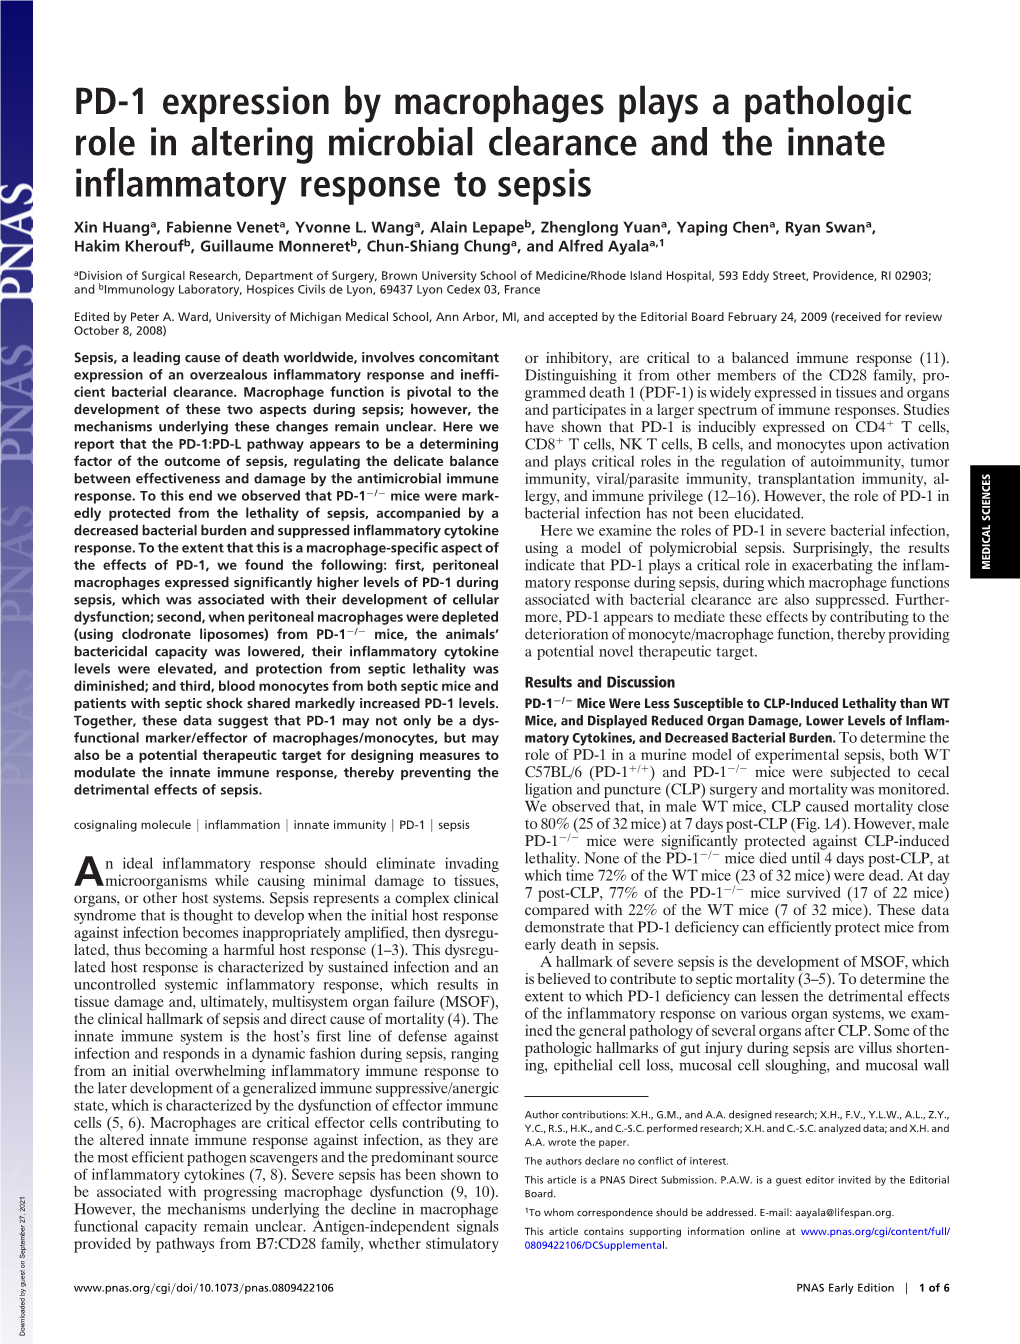 PD-1 Expression by Macrophages Plays a Pathologic Role in Altering Microbial Clearance and the Innate Inflammatory Response to Sepsis